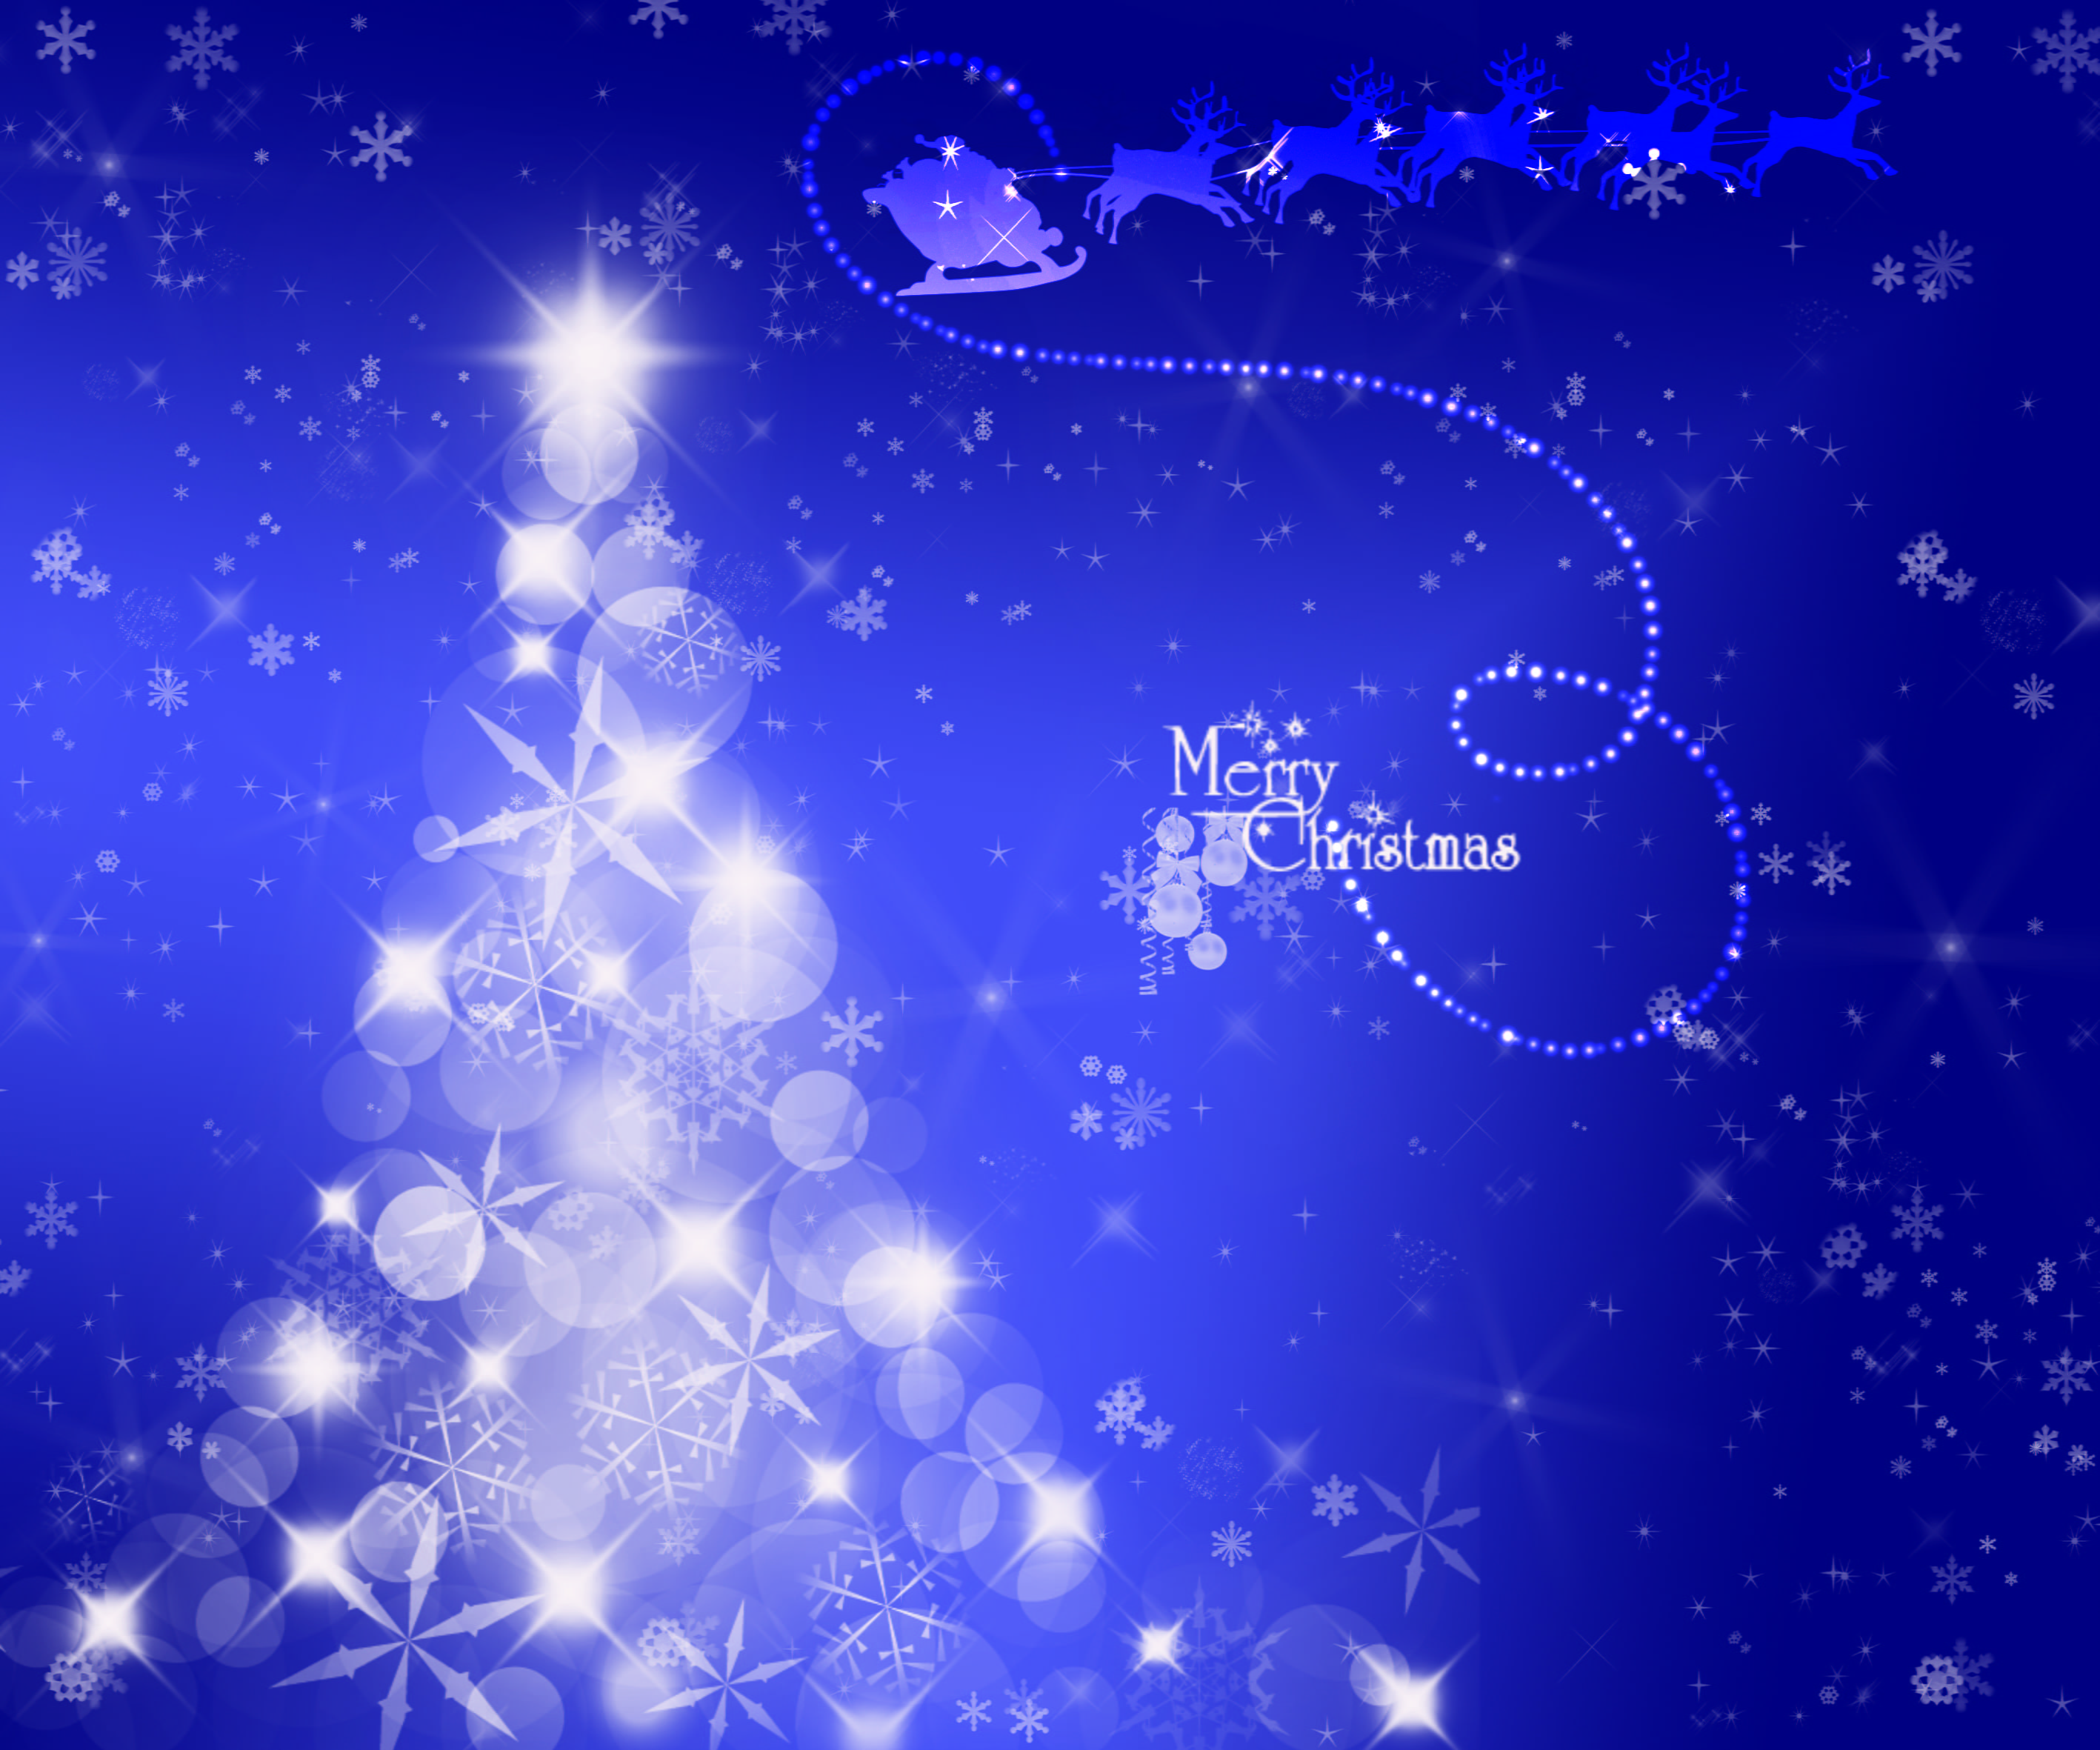 Merry Christmas wallpaper, winter, snow, background, holiday